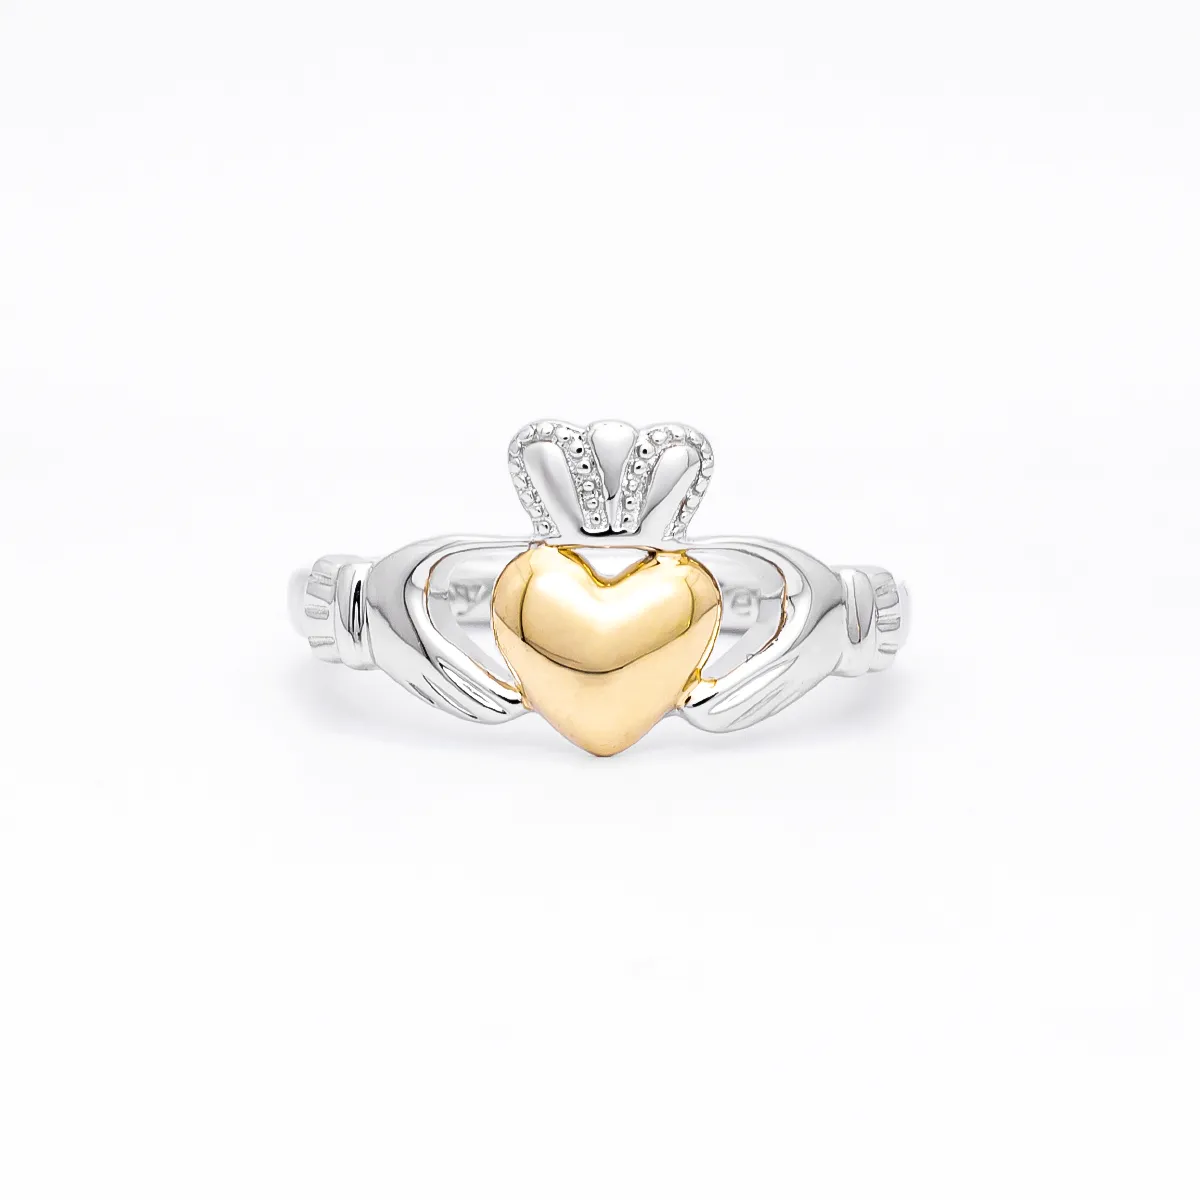 Sterling Silver Claddagh Ring with Gold Heart